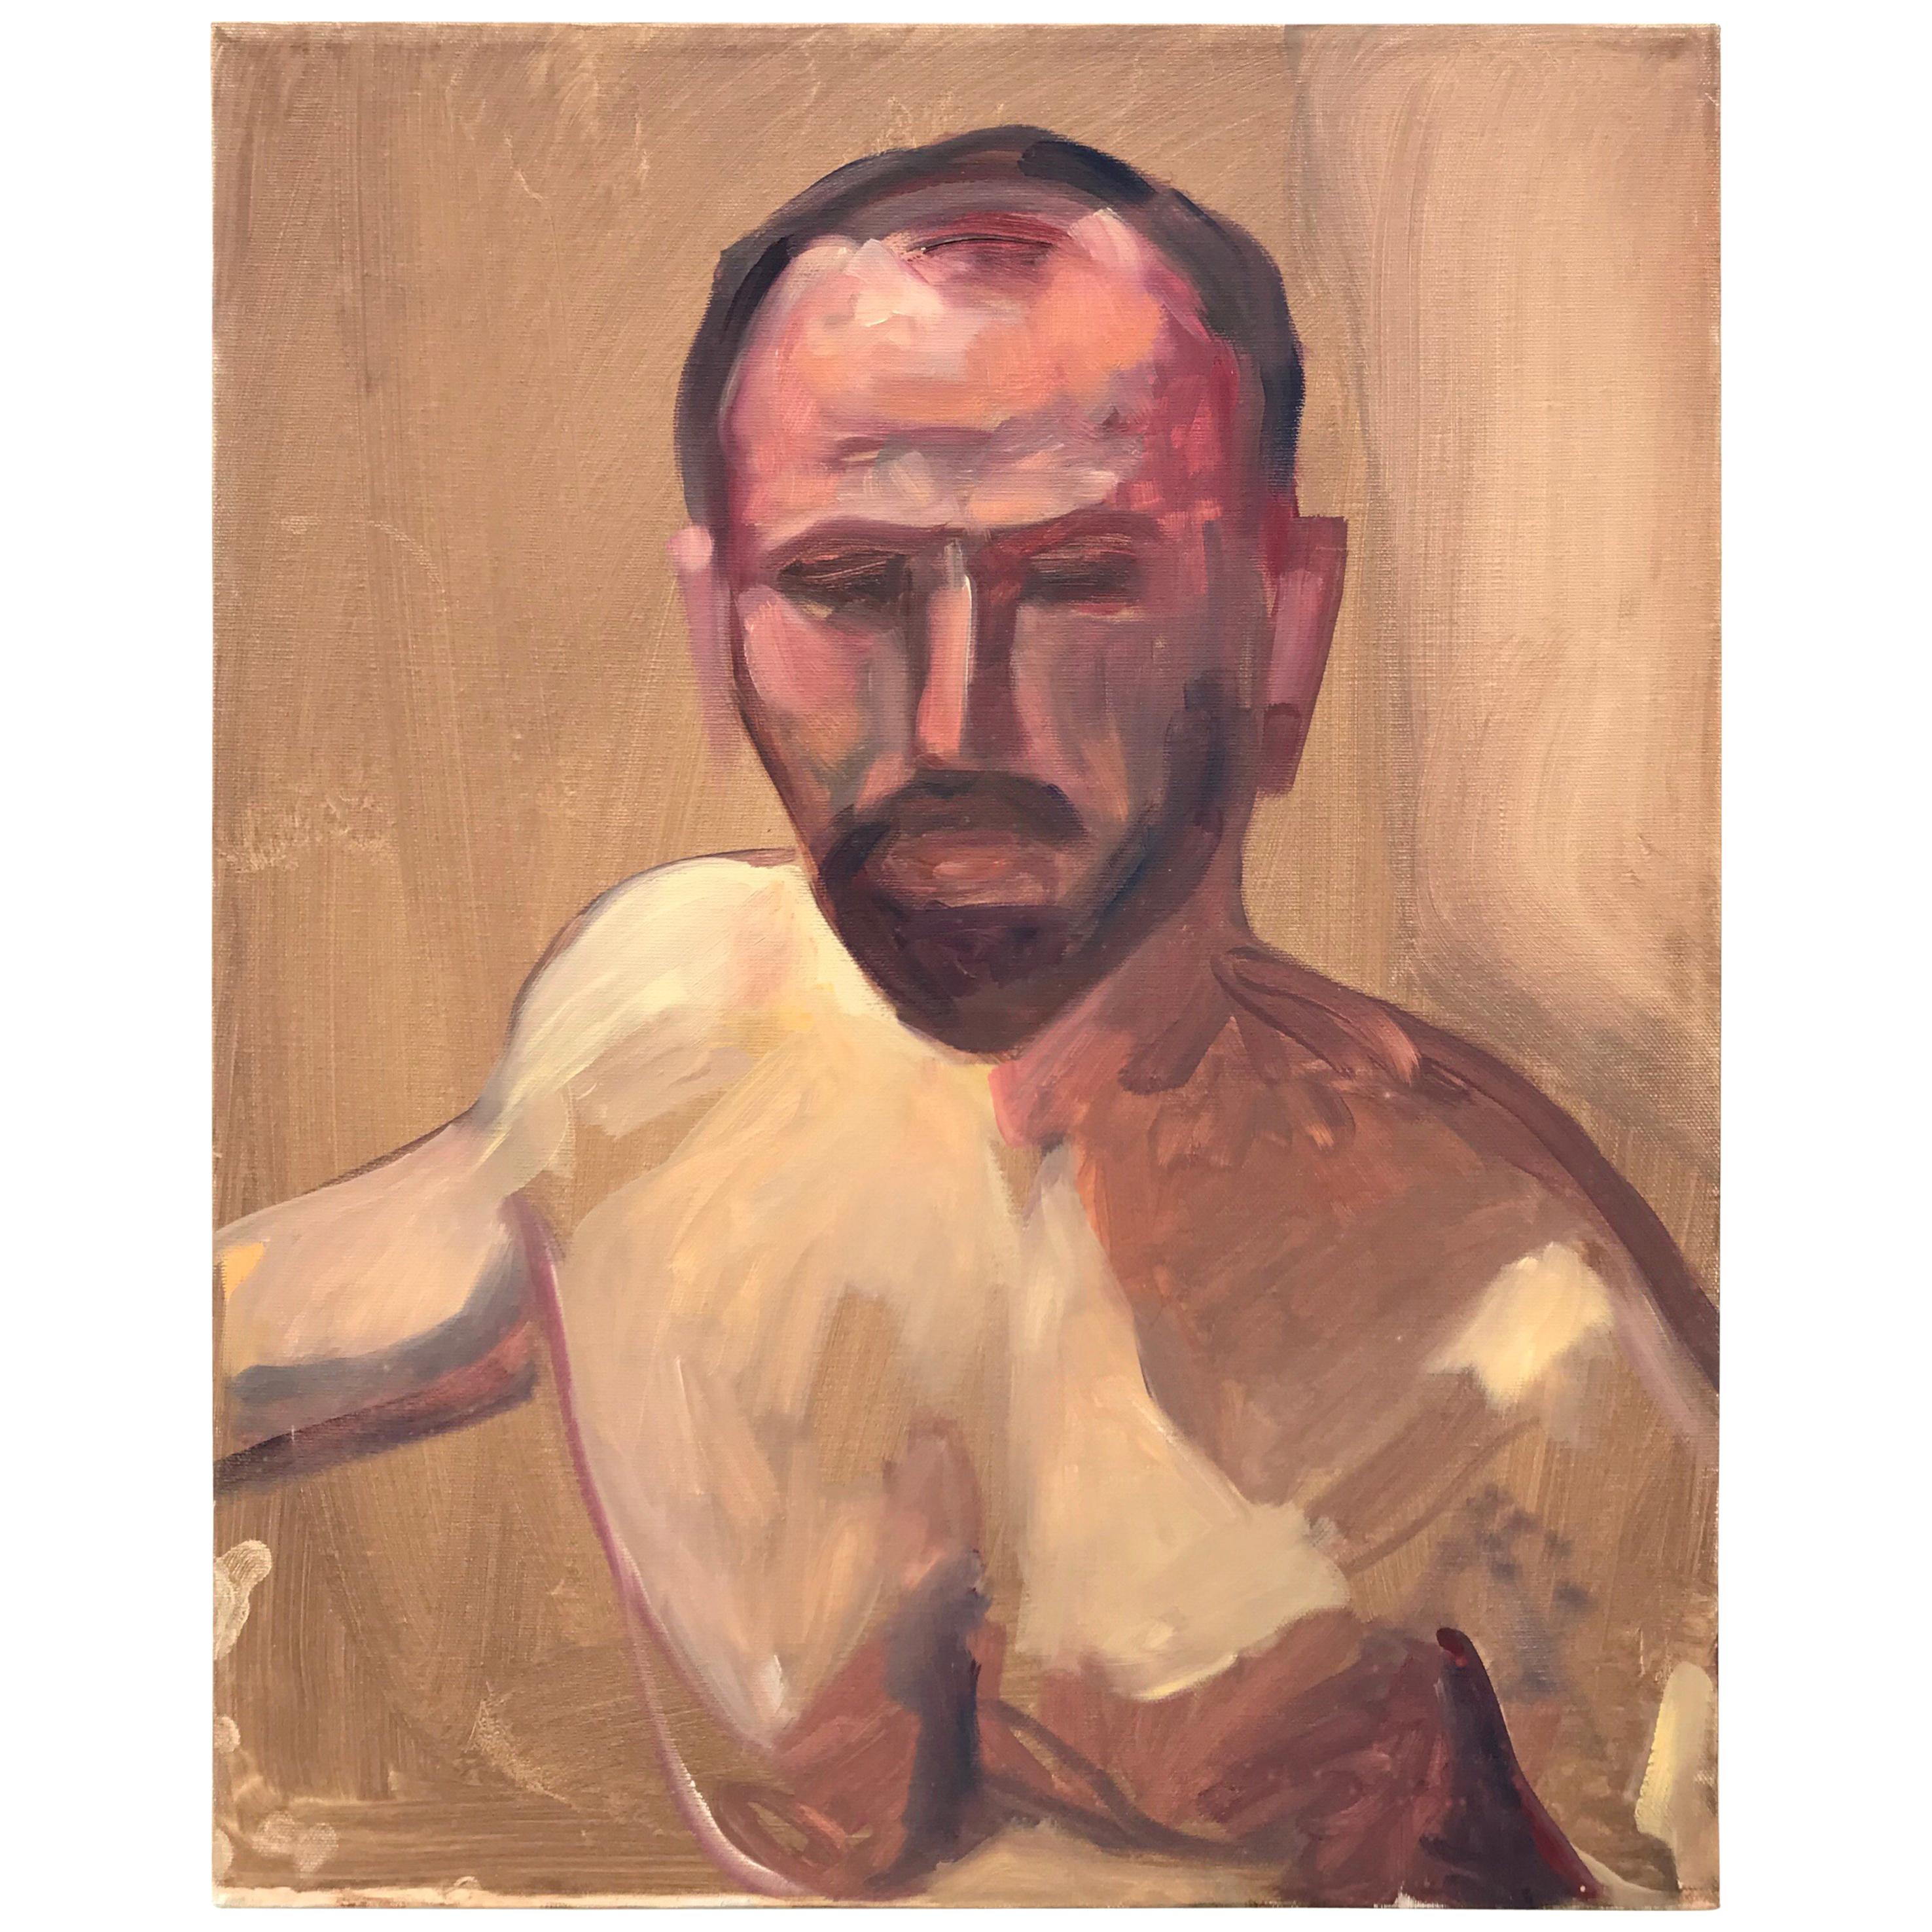 Acrylic on Canvas Nude Portrait Painting of “Doug” For Sale